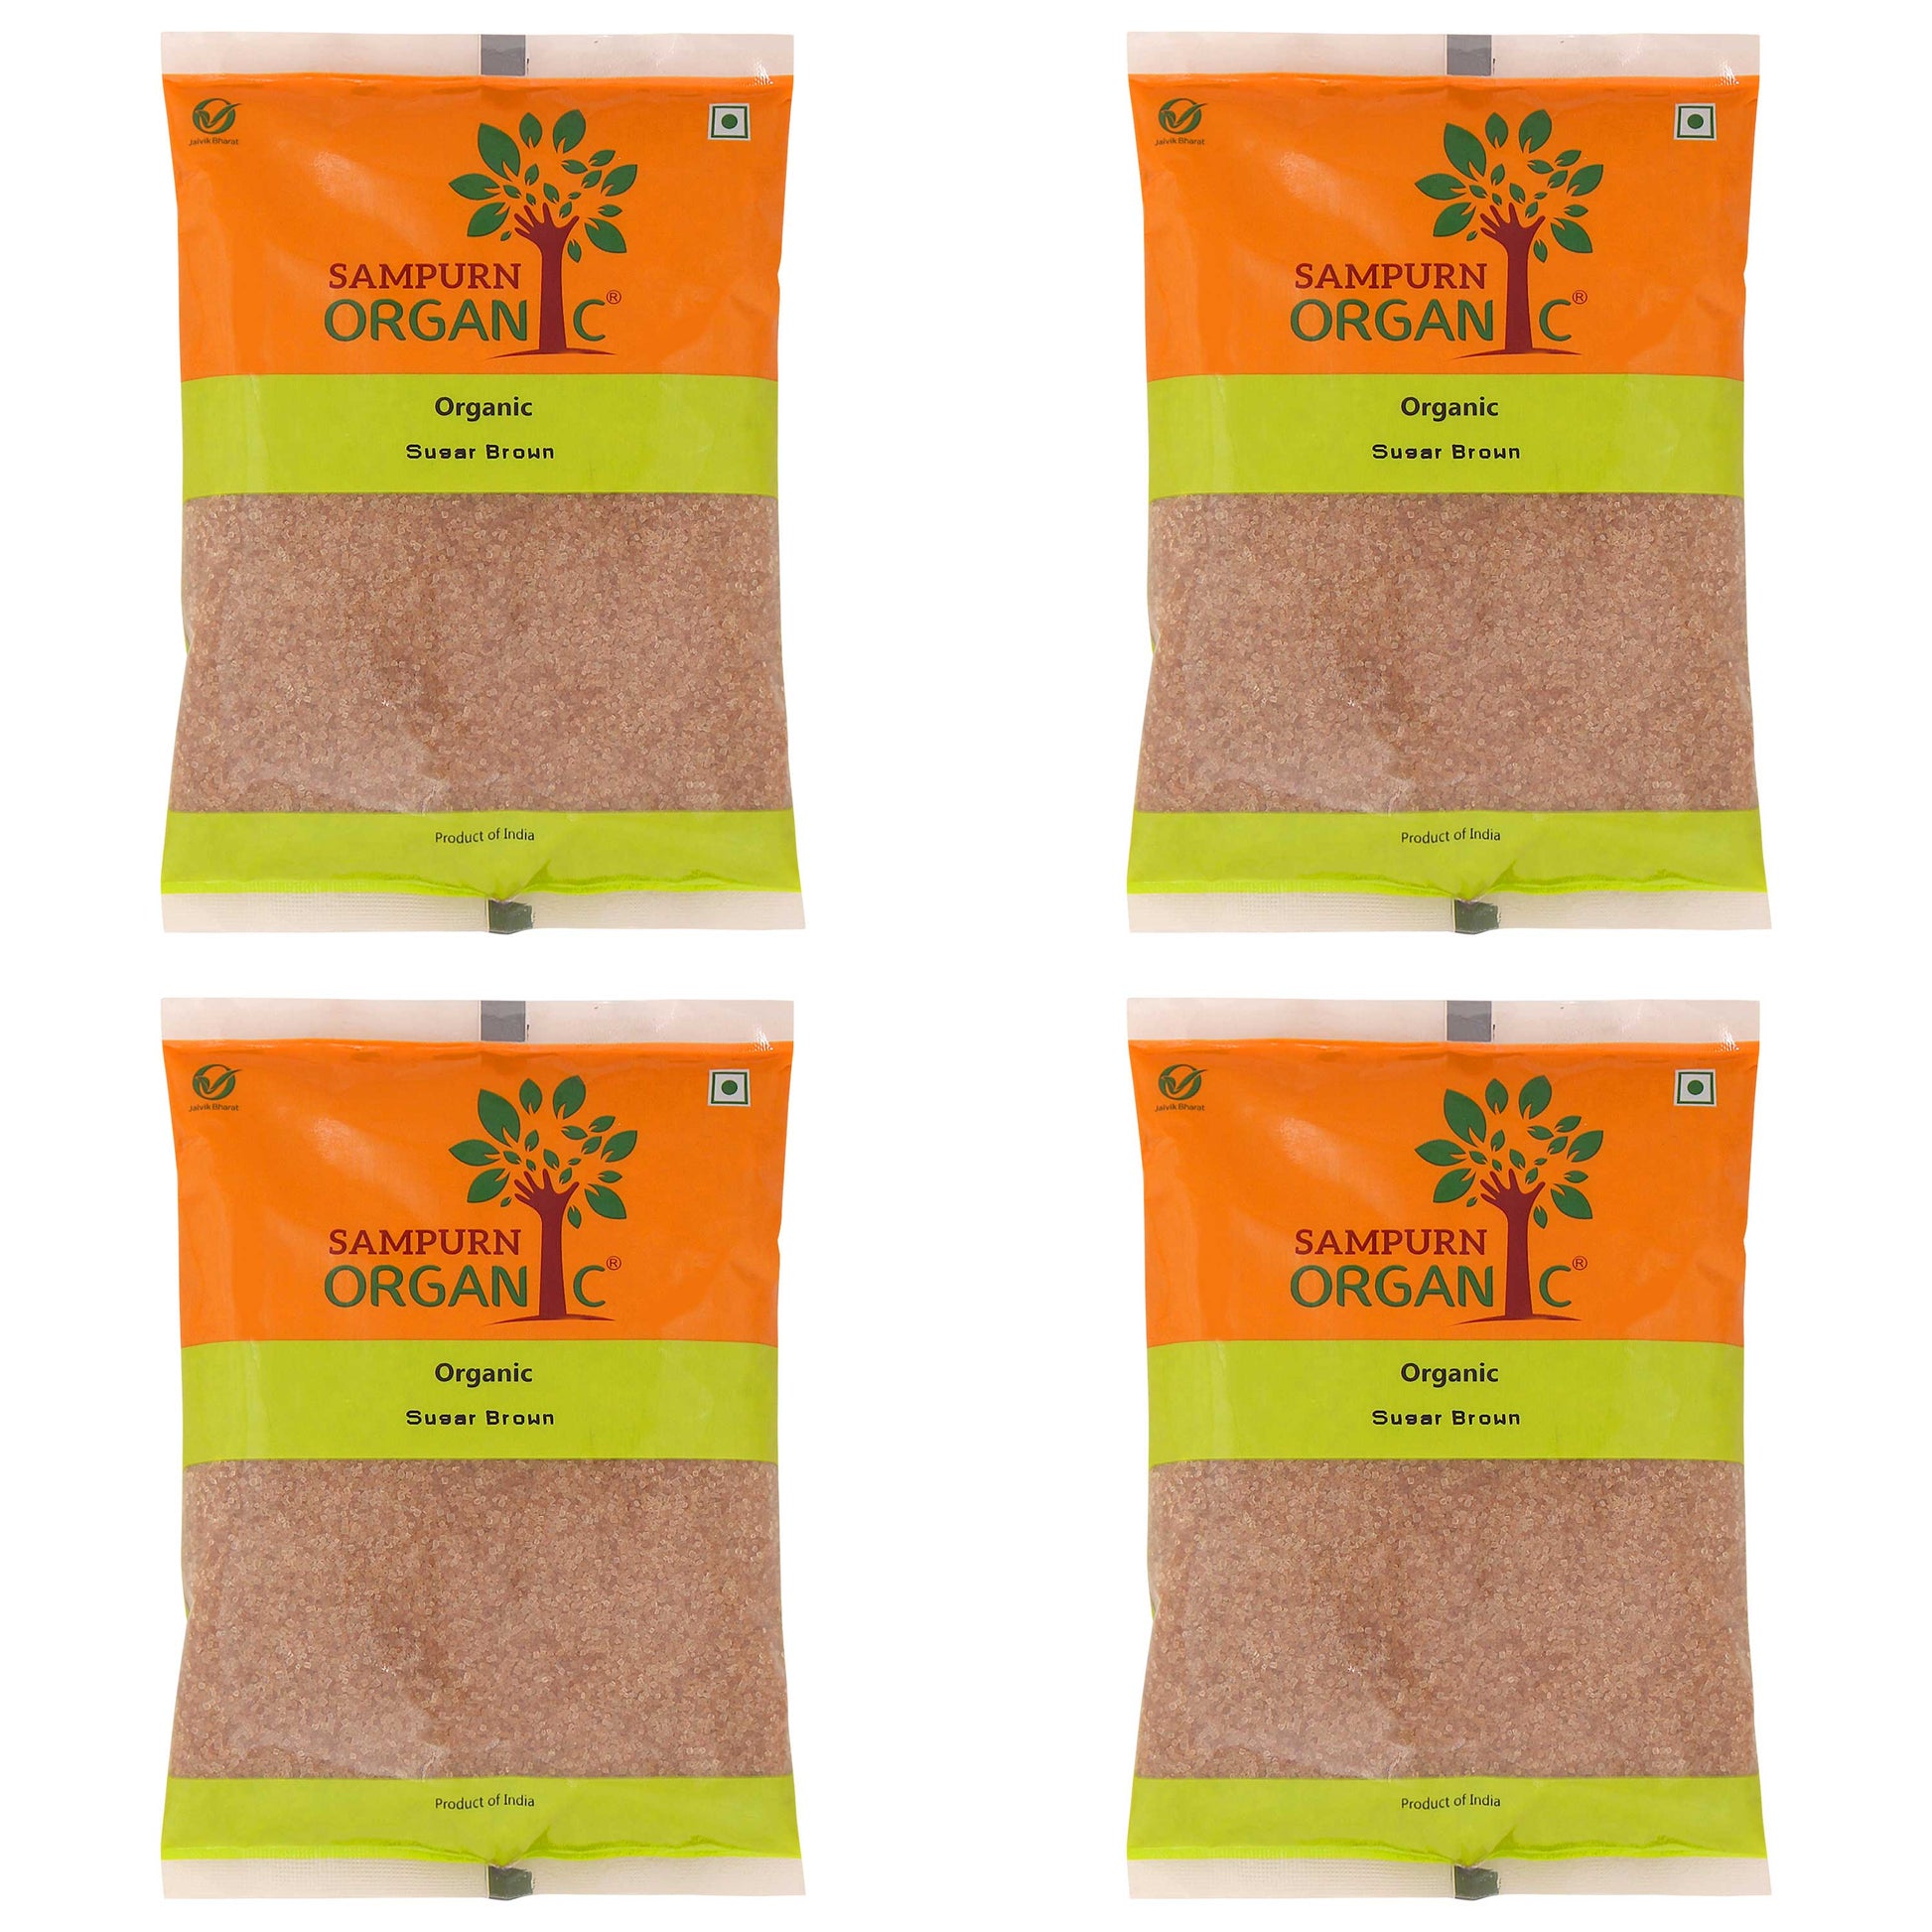 Sampurn organic jaggery powder for babies 500 gm fresh sugar suger grocery natural pure jaggary jaggry jagerry powered gur whole shakkar combo pack of 1 kg .  .Sampurn Organic Jaggery powder is made from evaporated organic sugar cane juice and it does not contain any chemical, calcium lime is added which is permitted .